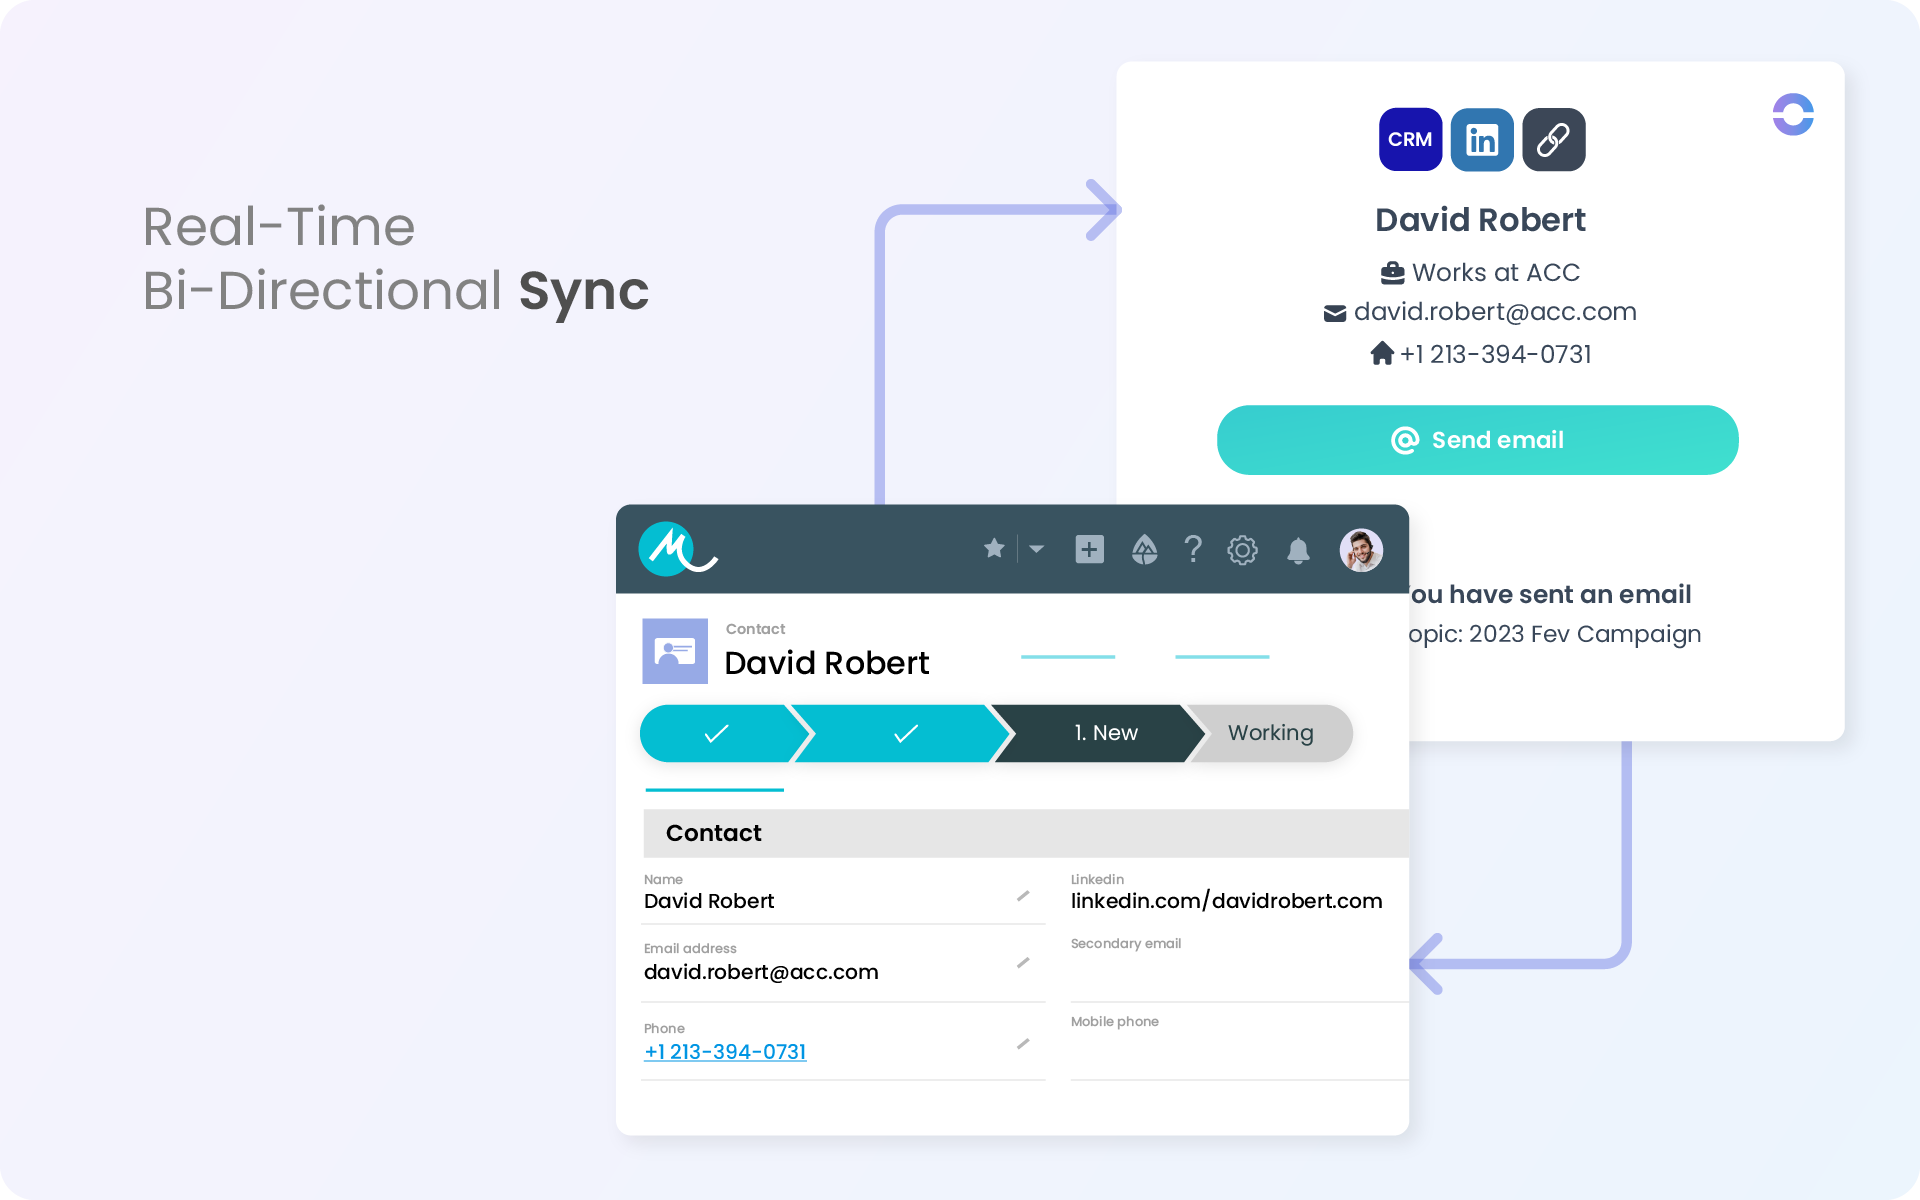 Cadence - Connected to your CRM